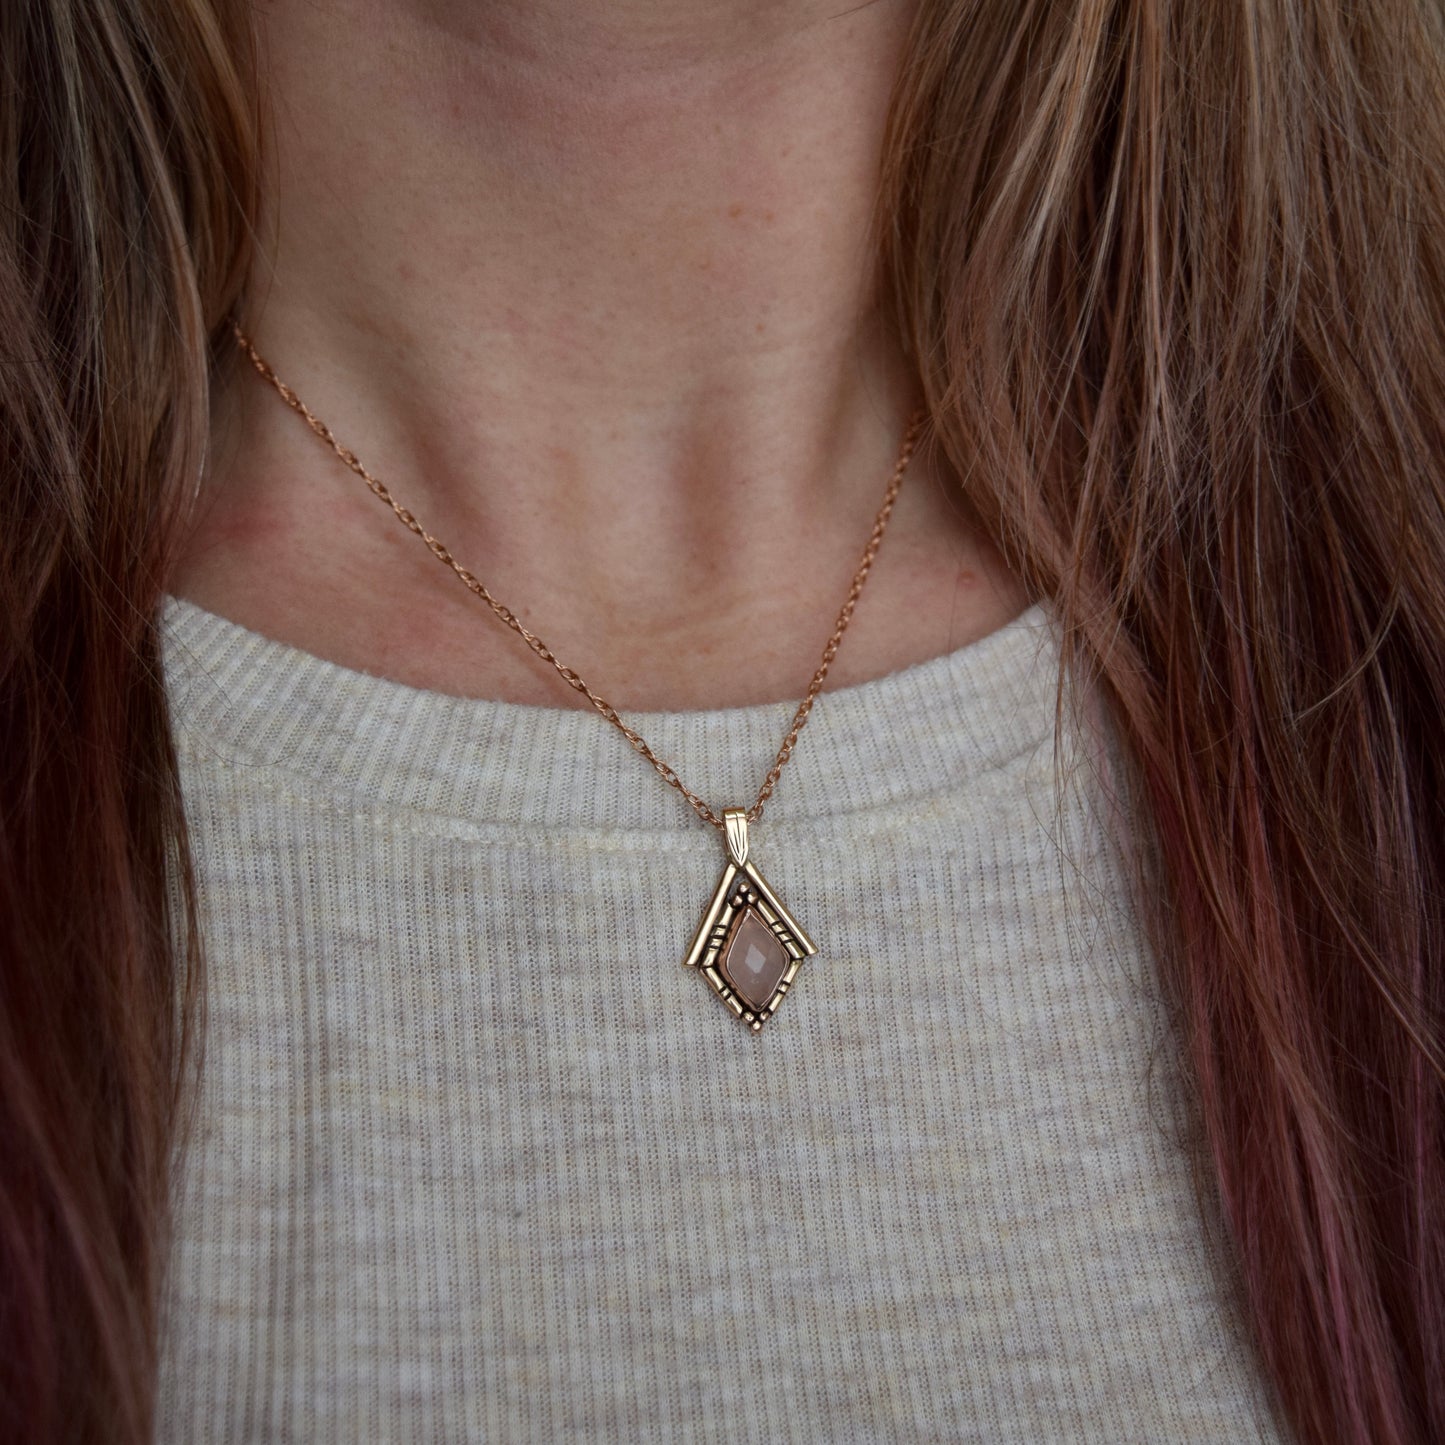 North Star Necklace with Rose Cut Morganite, 14k Solid Rose Gold, and Gold Fill